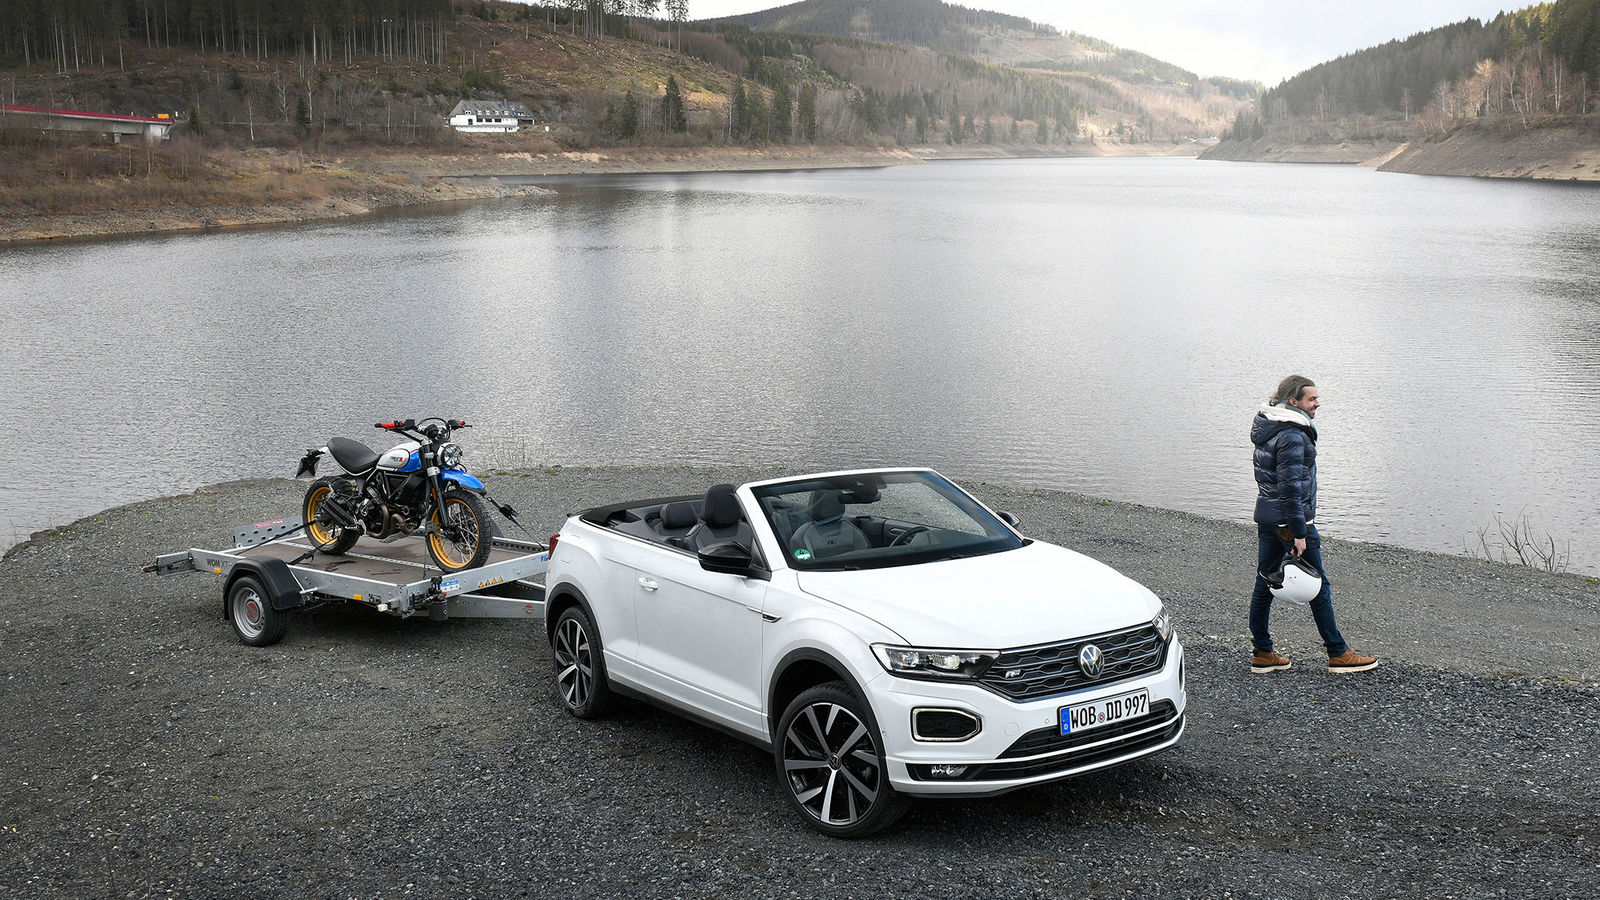 Story: “A T-Roc Cabriolet for almost any occasion”